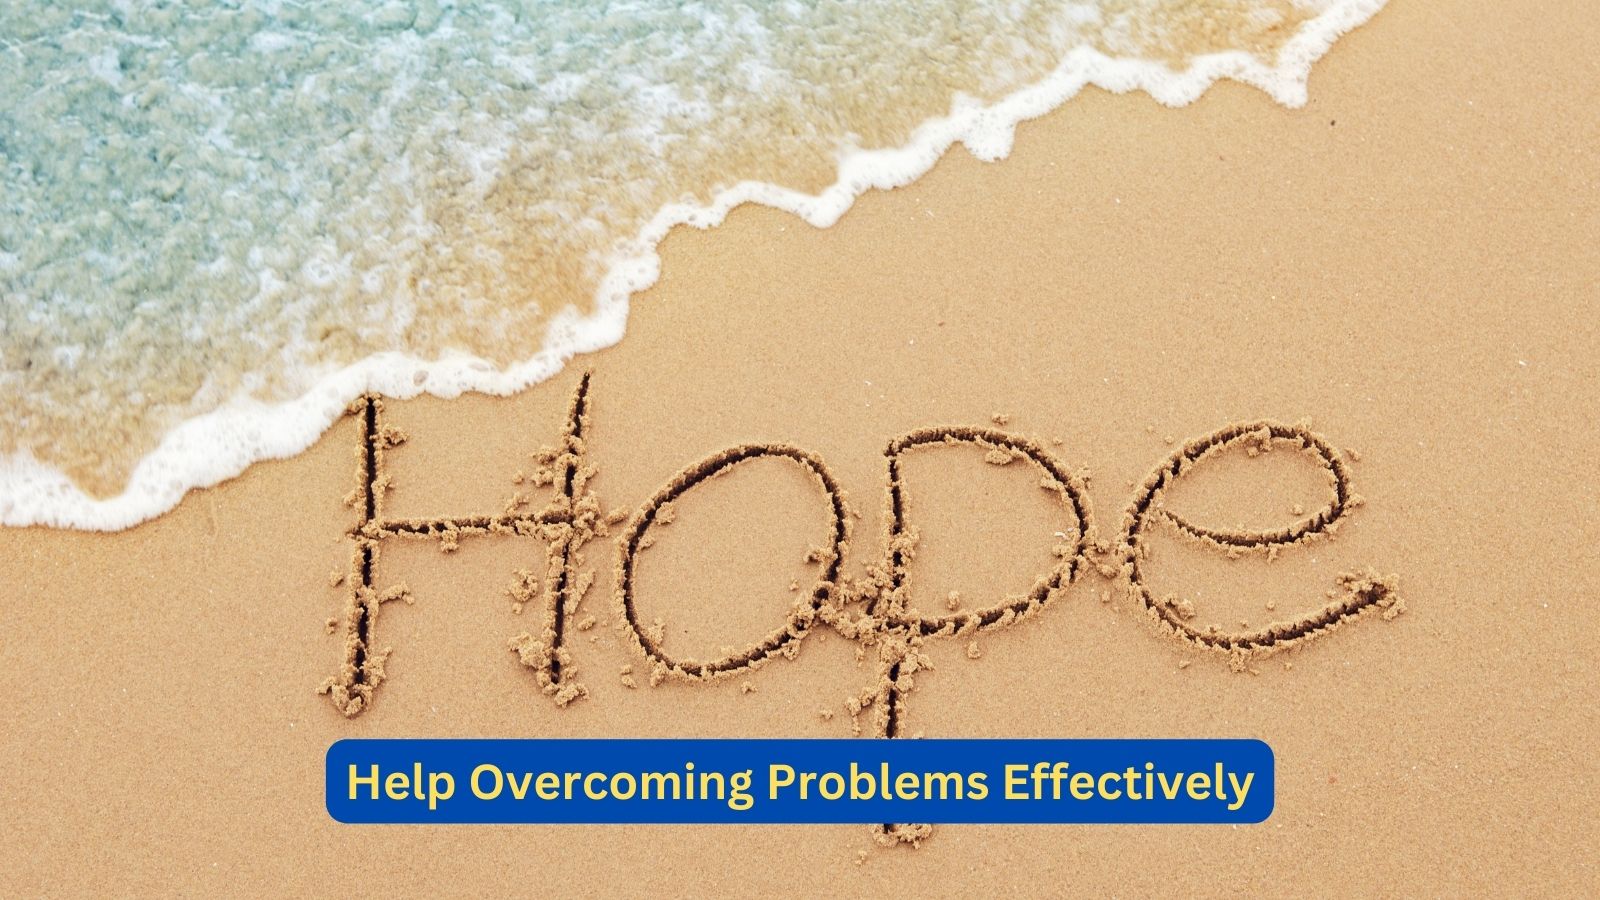 HOPE: Help Overcoming Problems Effectively